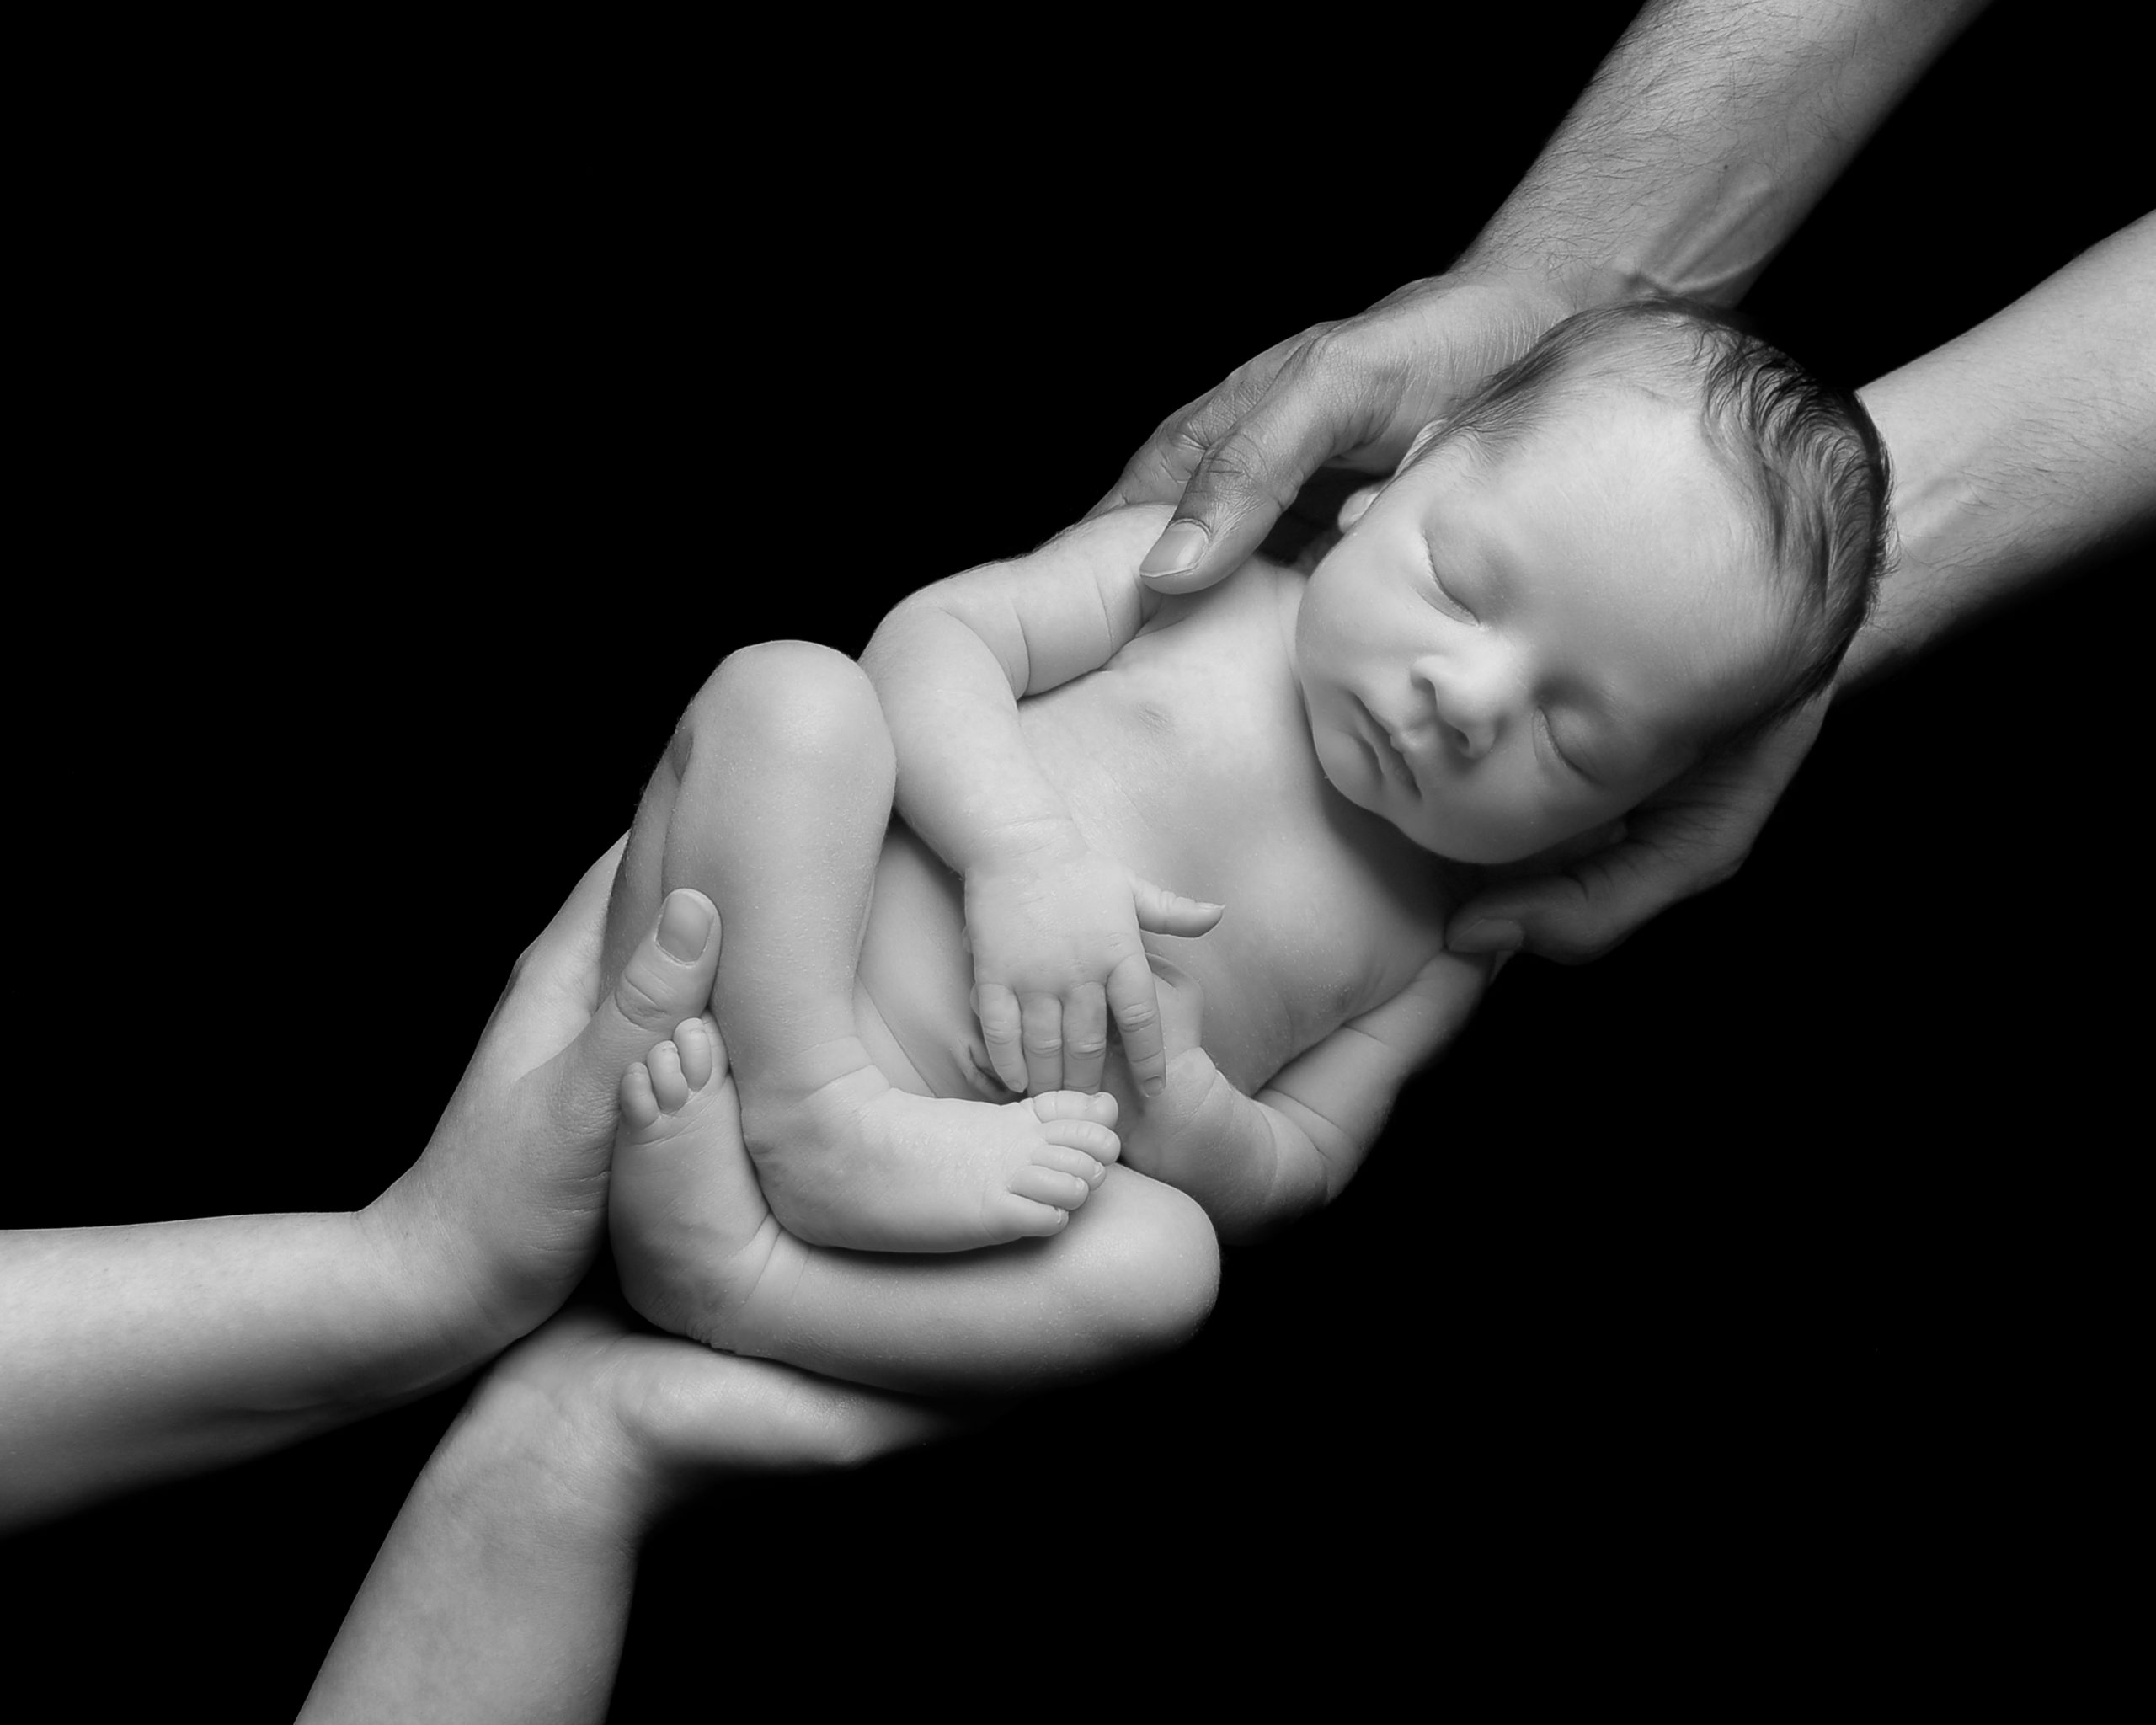 Newborn baby photographed layingg on s flat surface with mam and dad cradling